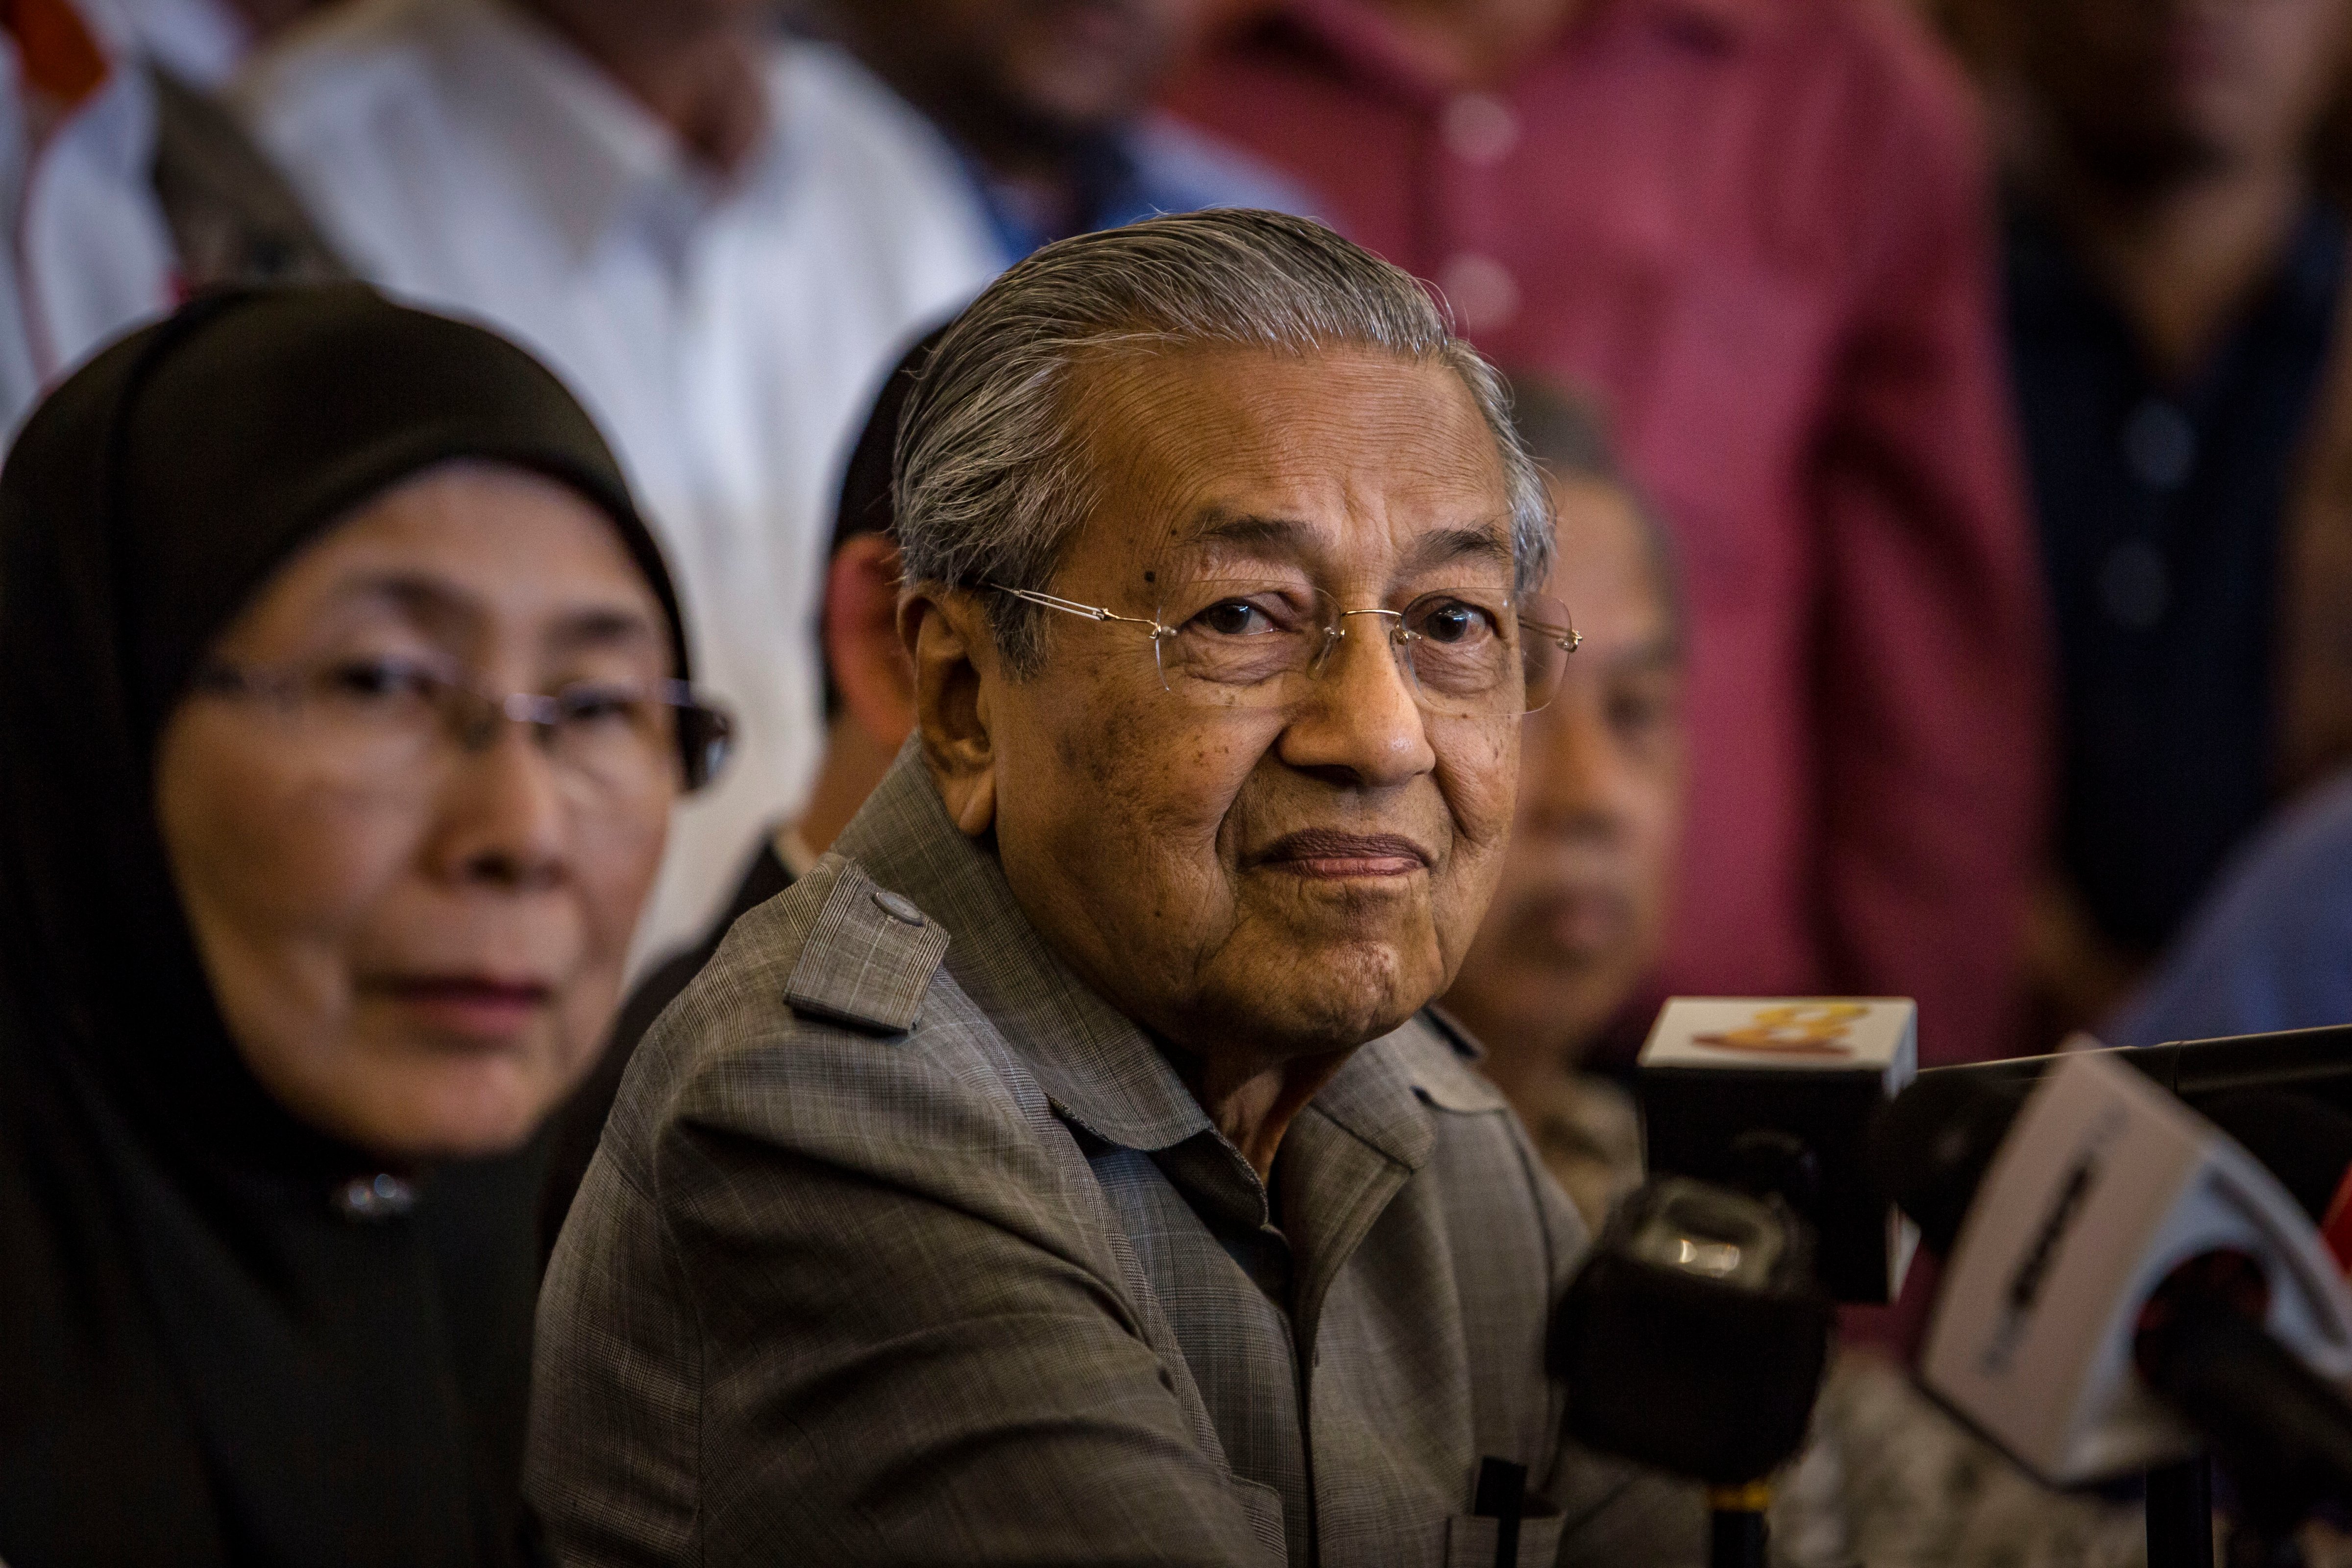 Mahathir Mohamad, chairman of 'Pakatan Harapan' during press conference following the 14th general election on May 10, 2018 in Kuala Lumpur, Malaysia. (Ulet Ifansasti—Getty Images)